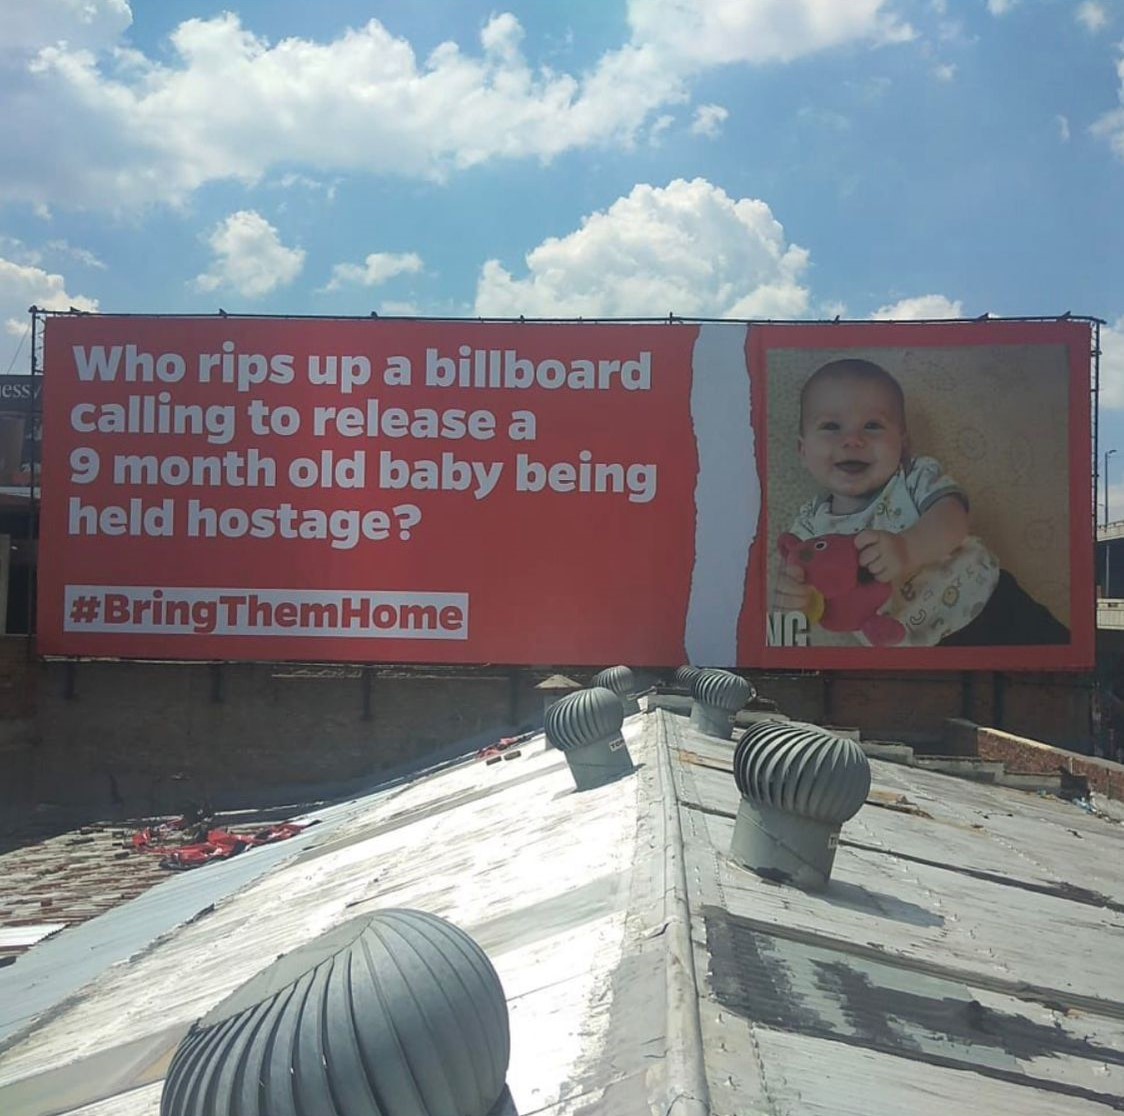 You can tear down our billboard but you cannot silence SA Jewry!